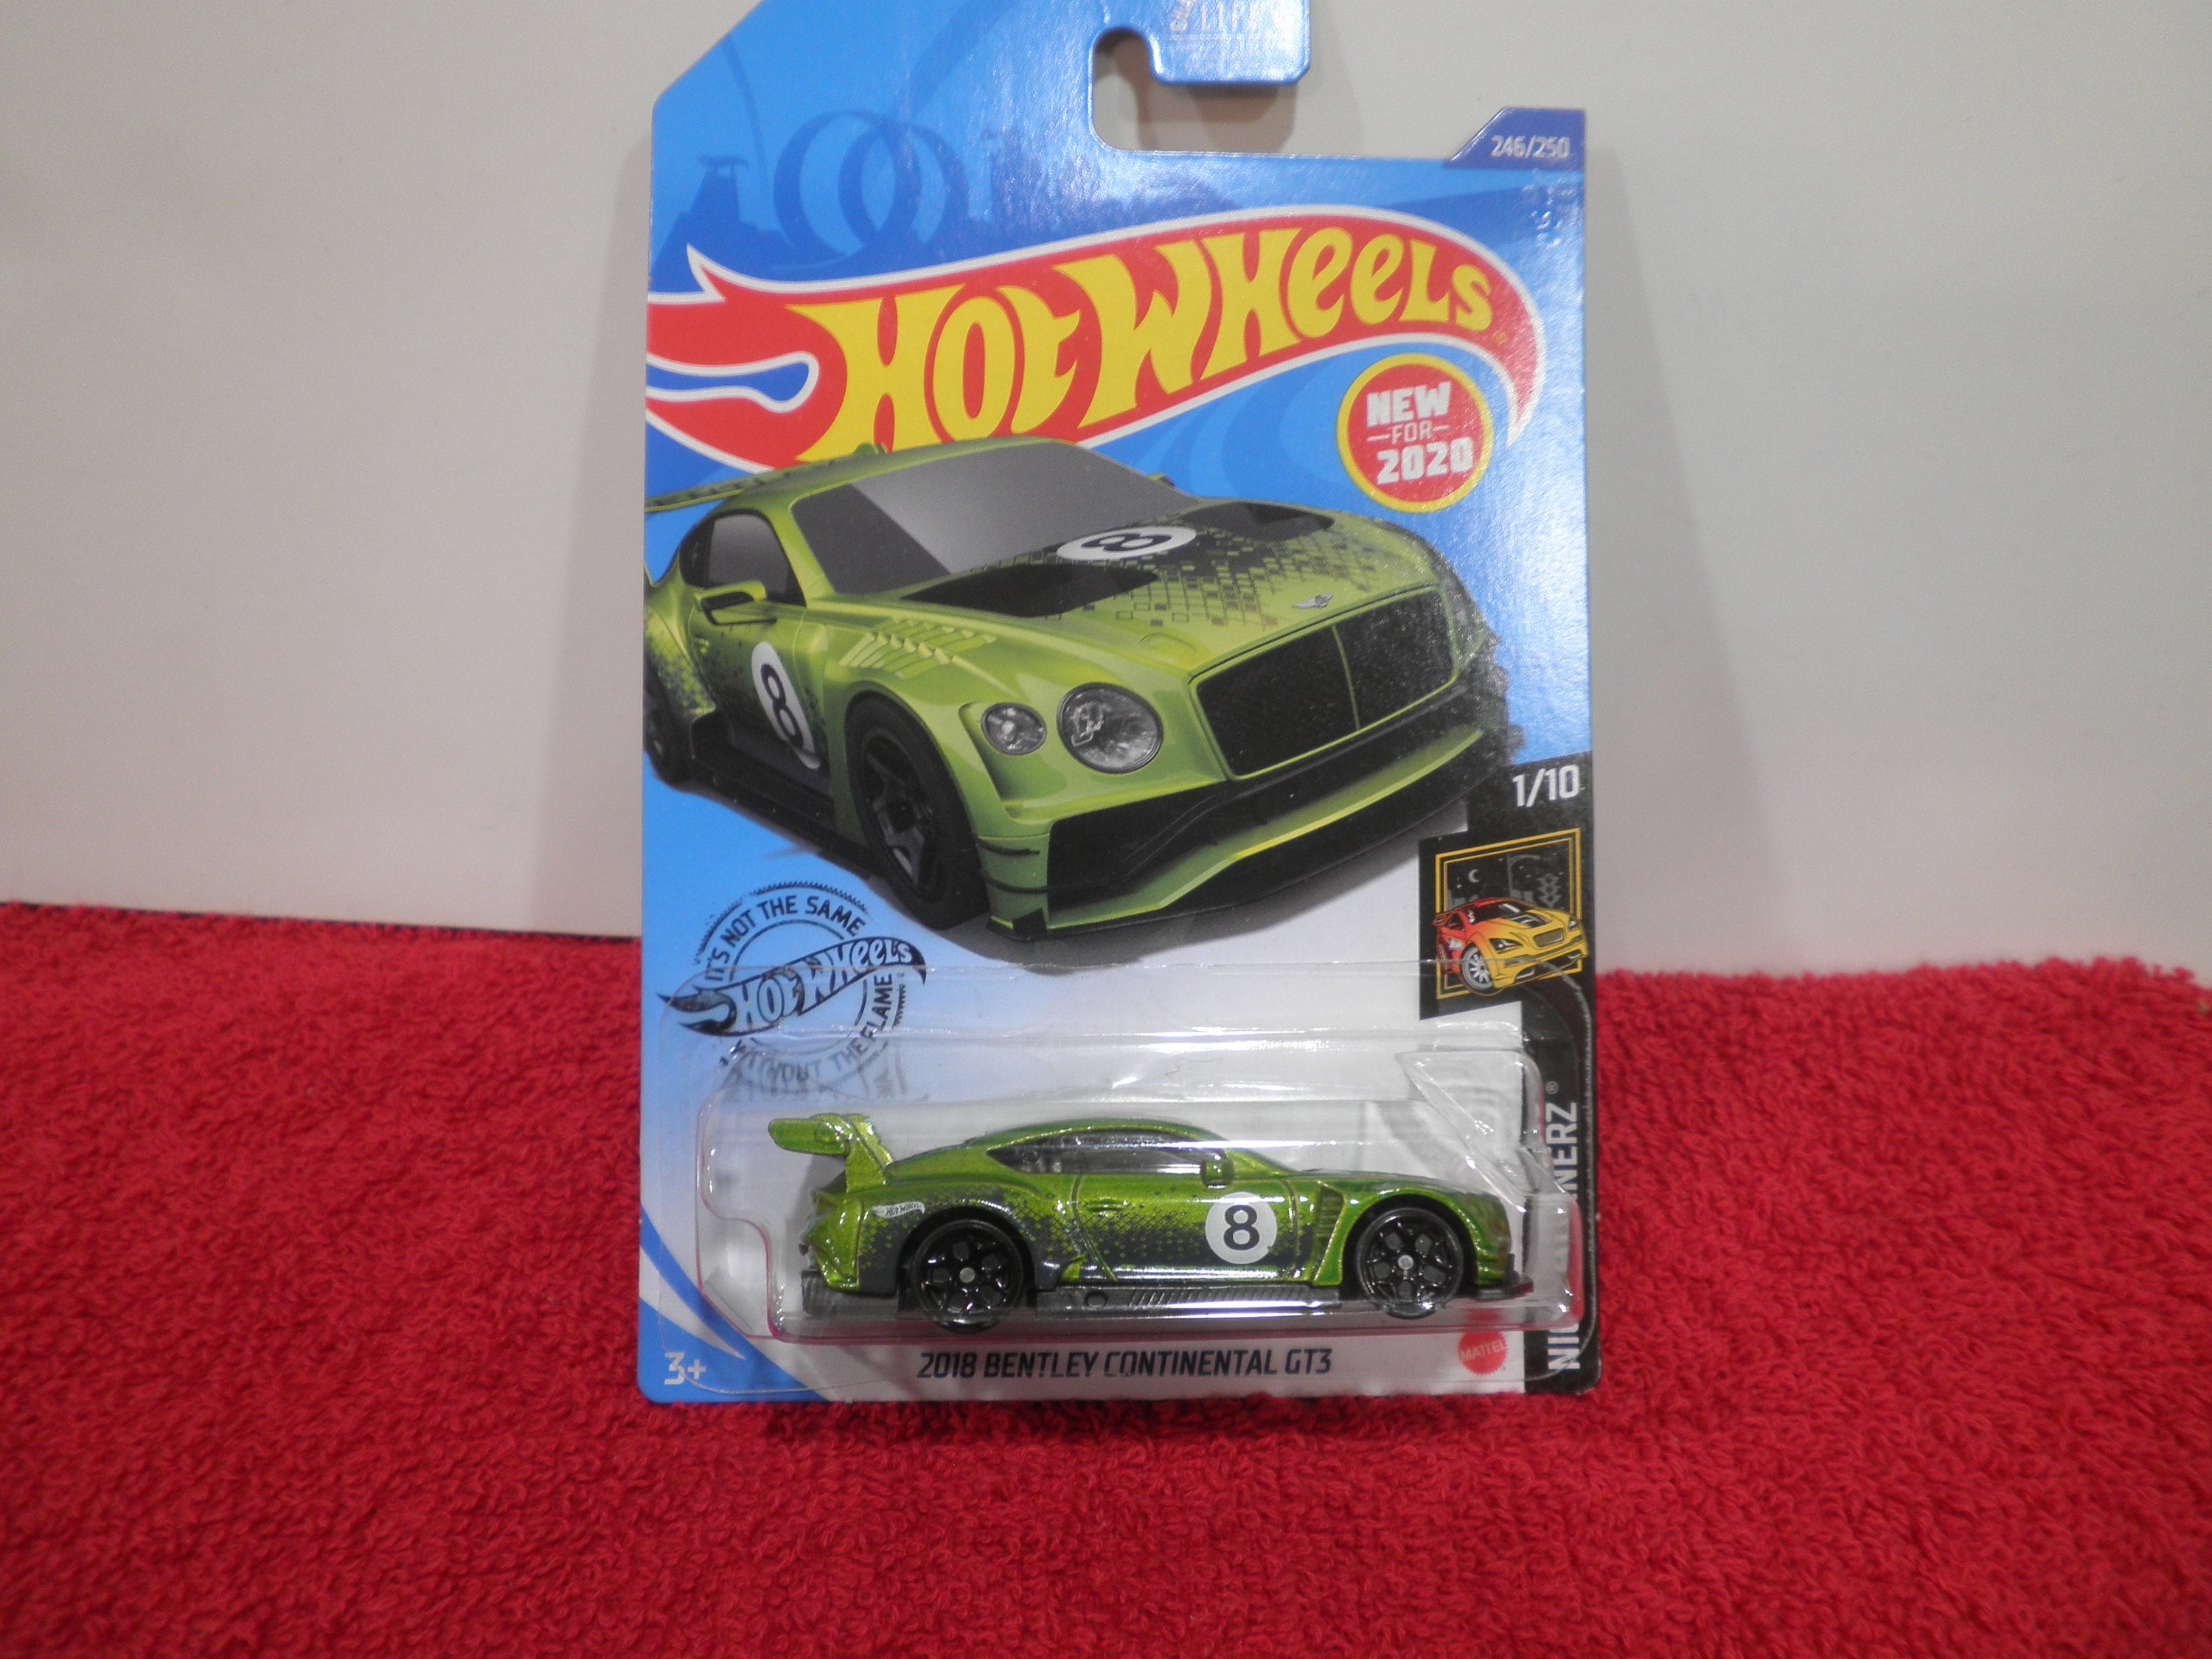 Hot Wheels Nightburnerz 1/10 2018 Bentley Continental GT3  Brand New as a supply  to offer collectors an item they may have missed